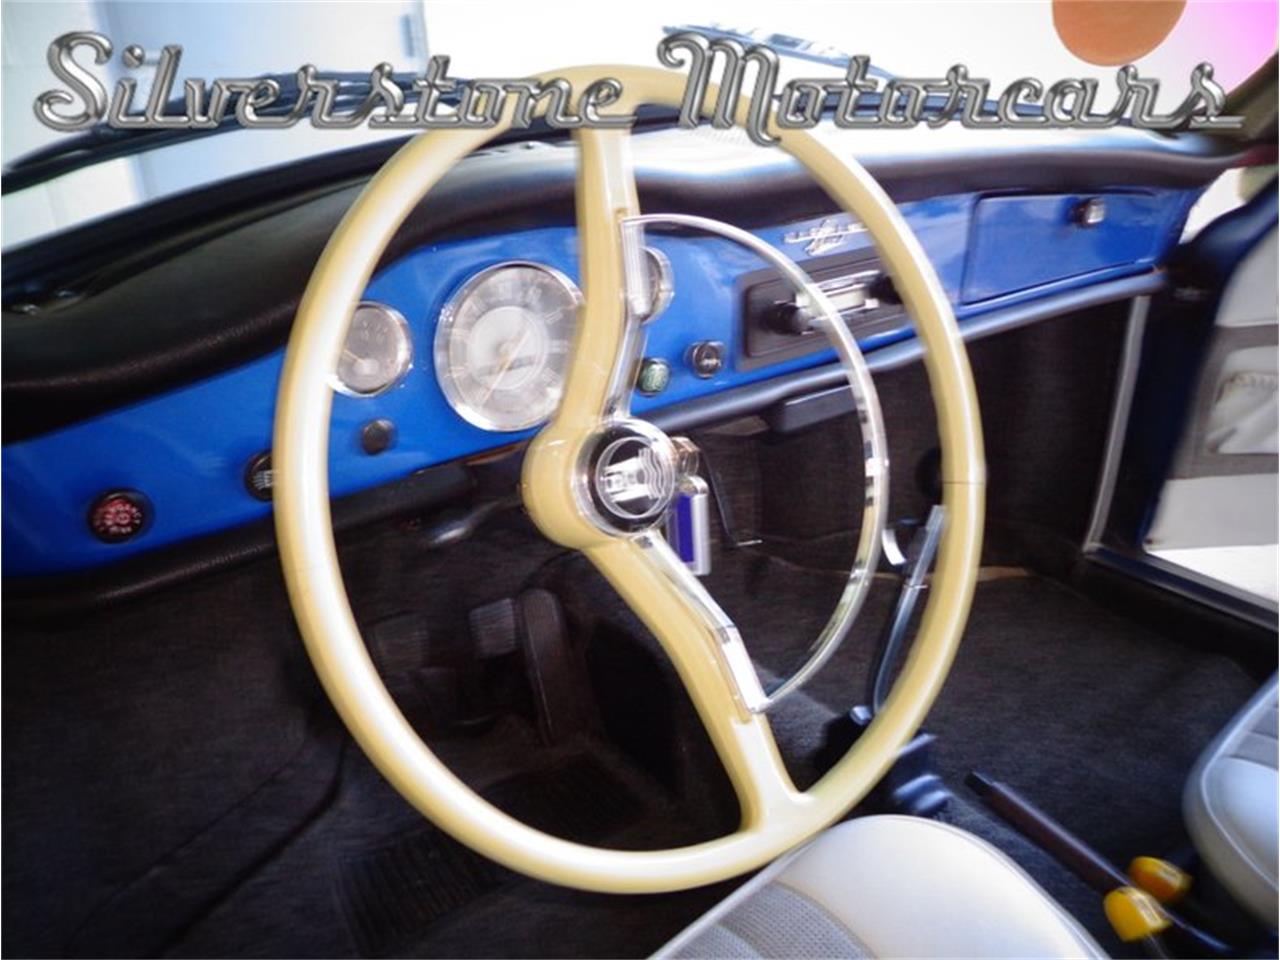 1971 Volkswagen Karmann Ghia for sale in North Andover, MA – photo 36